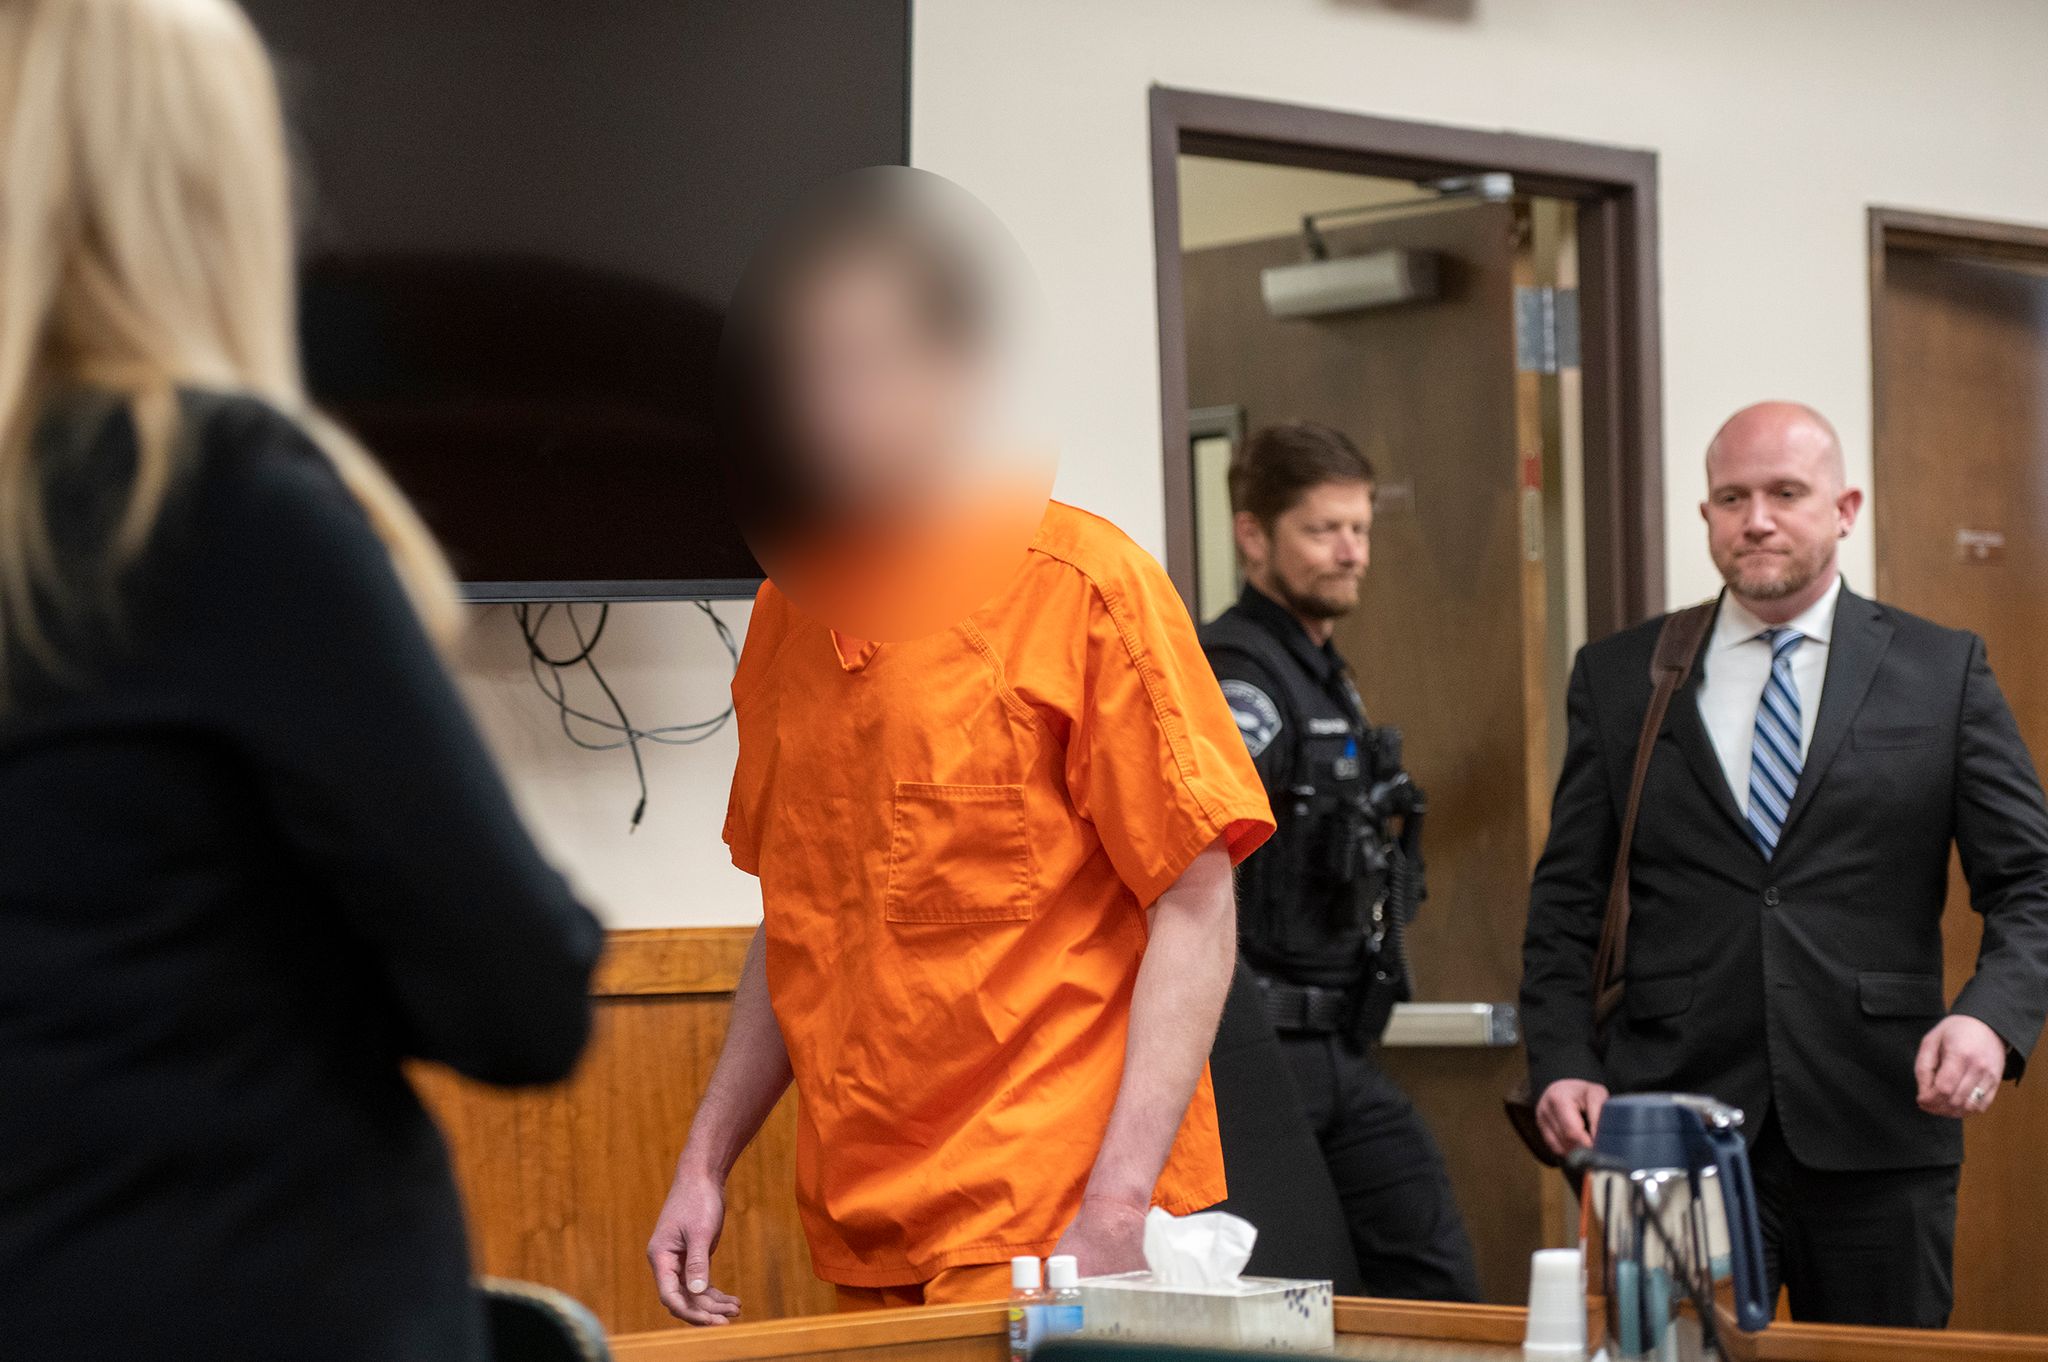 Mordprozess in Idaho: Anklage will Todesstrafe